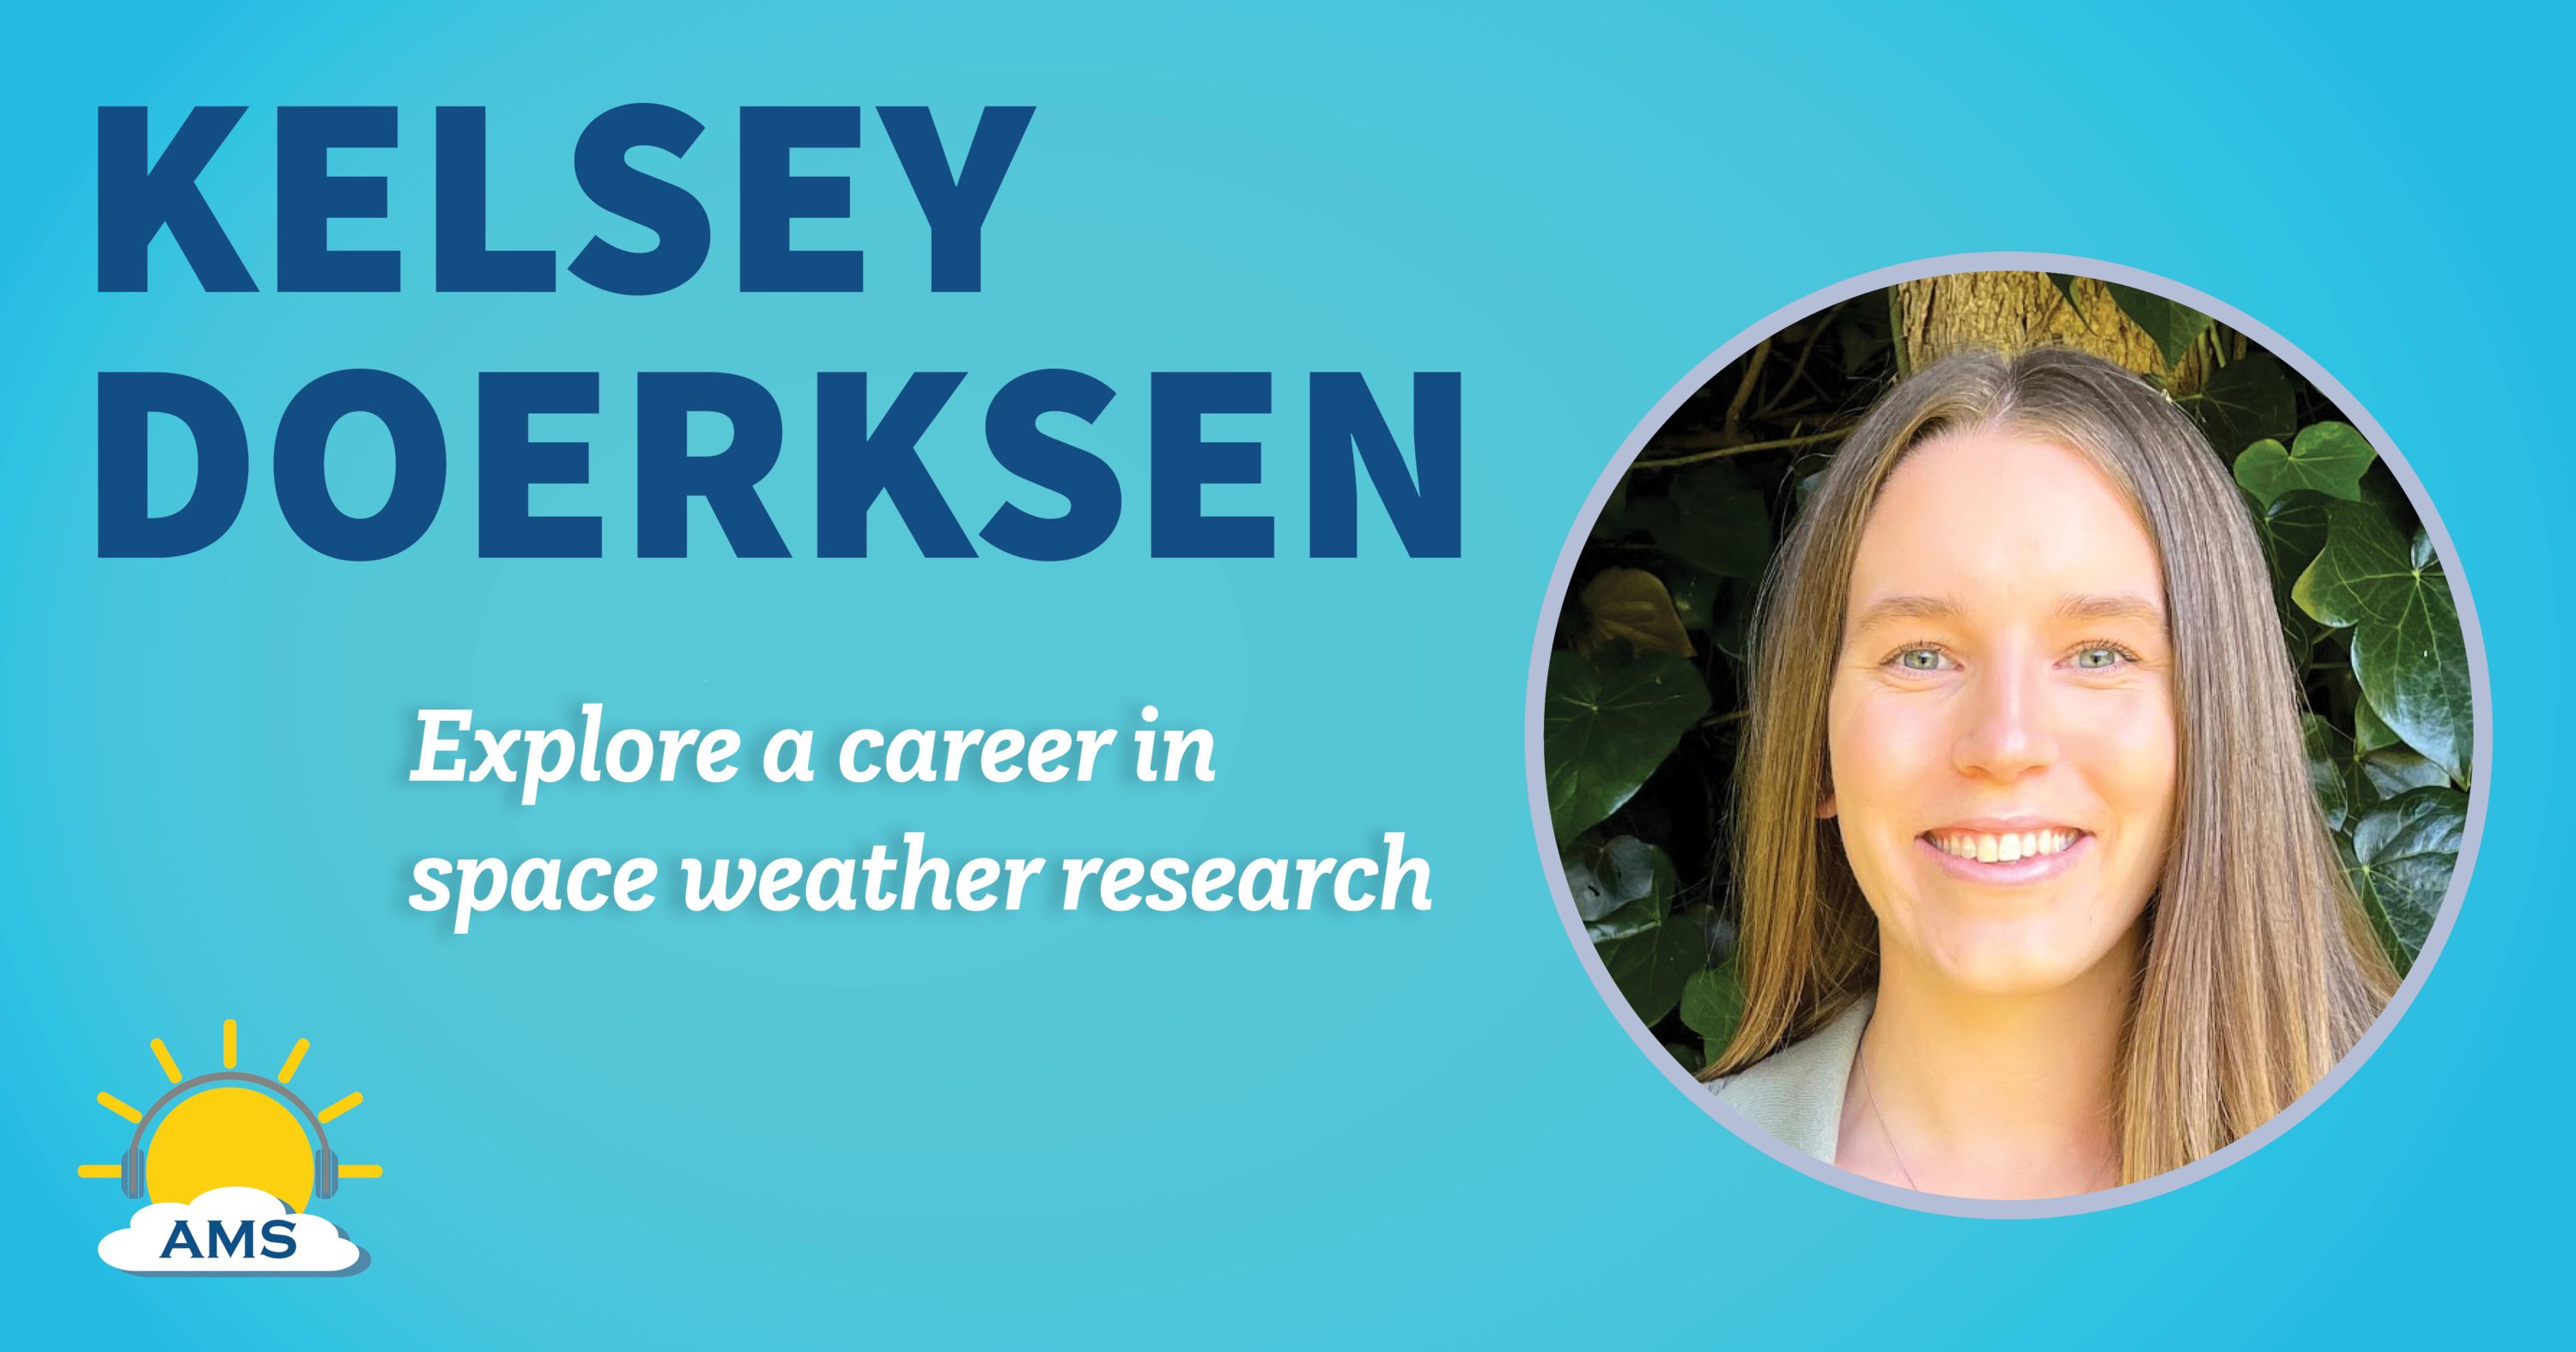 kelsey doerksen headshot graphic with teaser text that reads &quotexplore a career in space weather research"